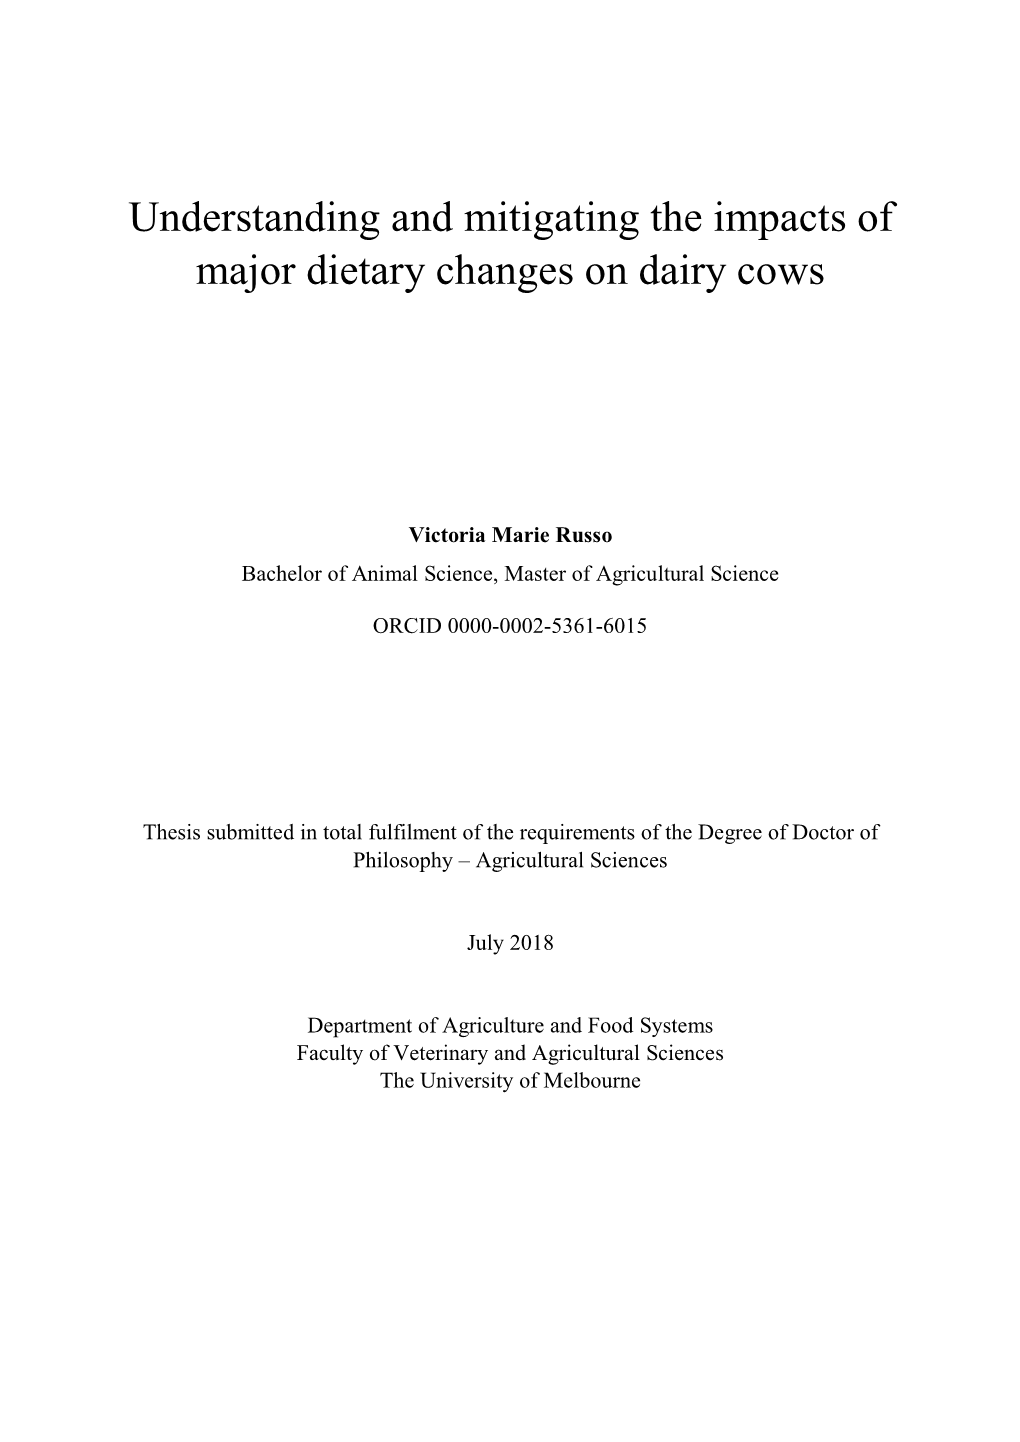 Understanding and Mitigating the Impacts of Major Dietary Changes on Dairy Cows